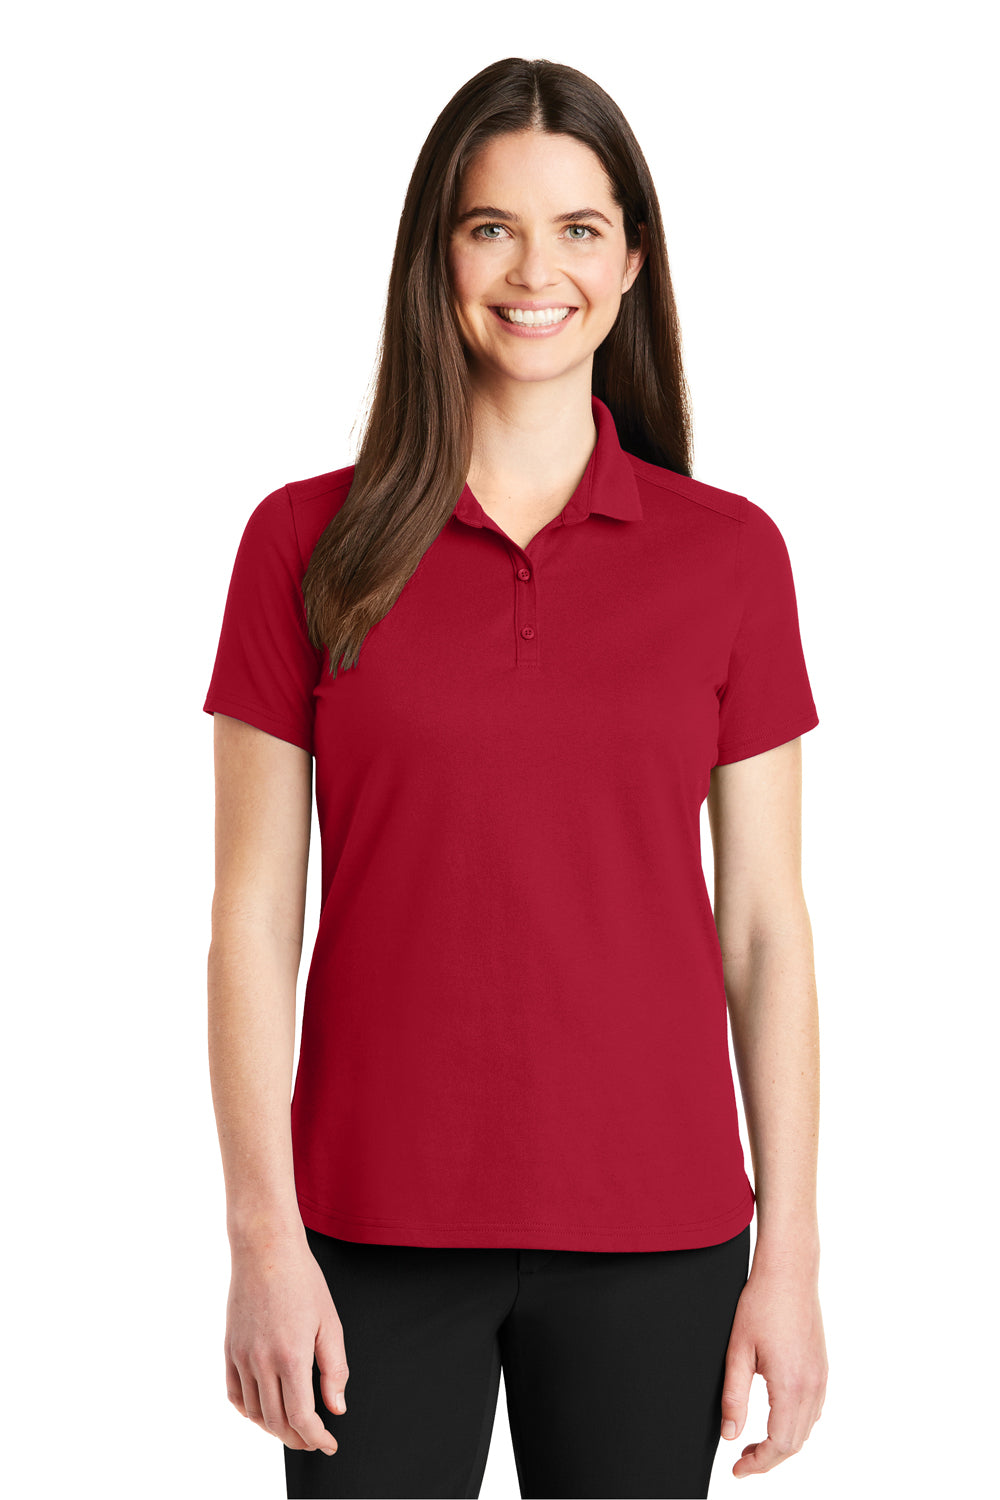 Port Authority LK164 Womens SuperPro Moisture Wicking Short Sleeve Polo Shirt Red Front